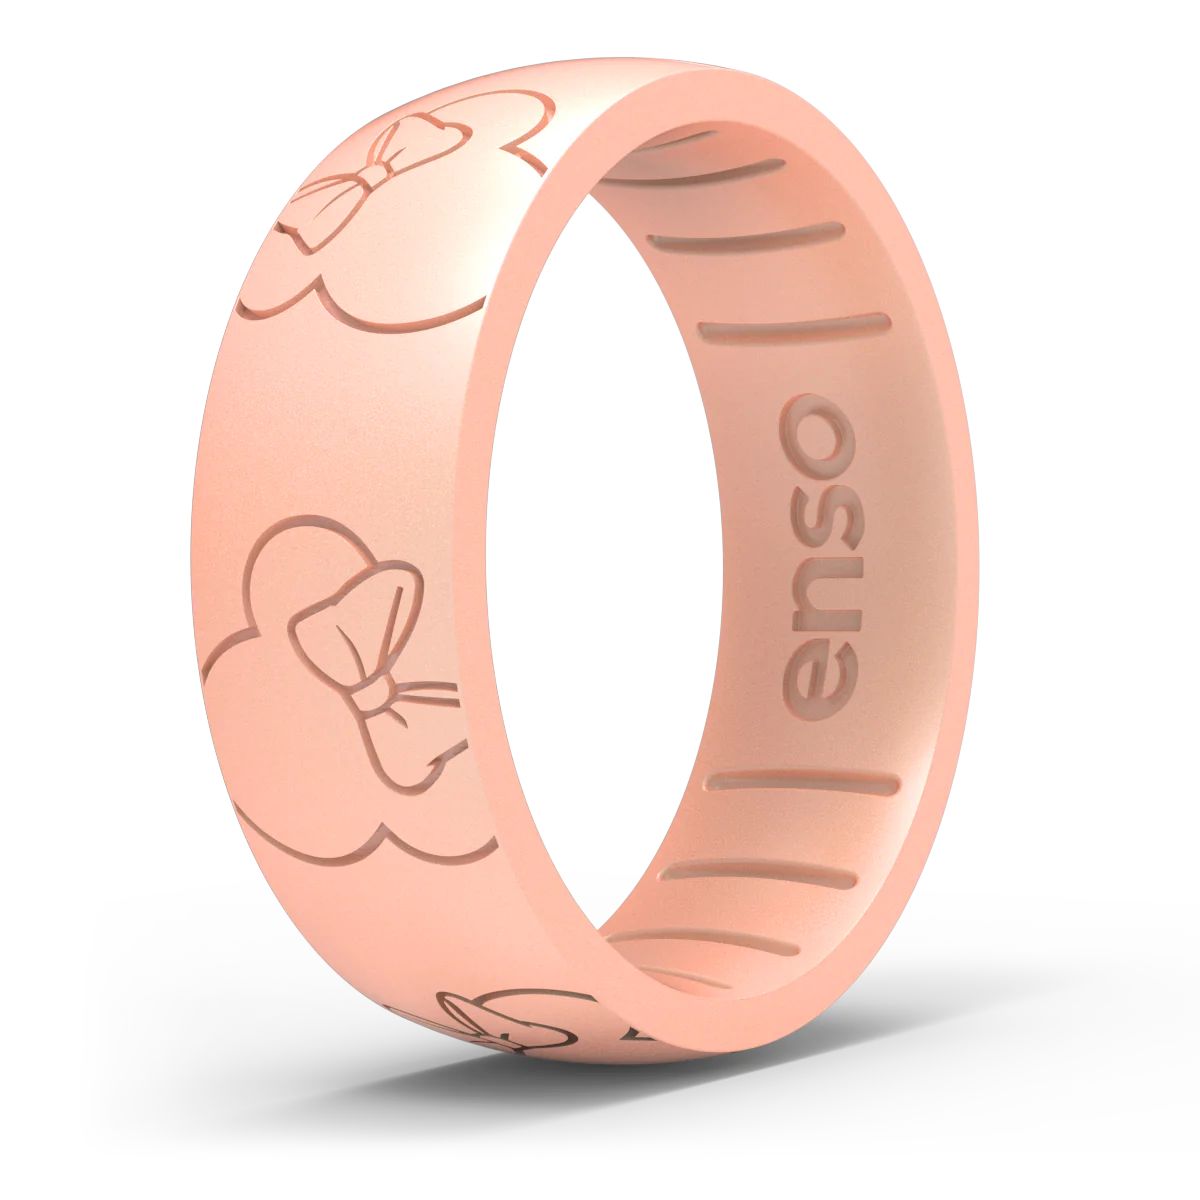 Disney - Minnie Mouse All Around Ears - Rose Gold | Enso Rings